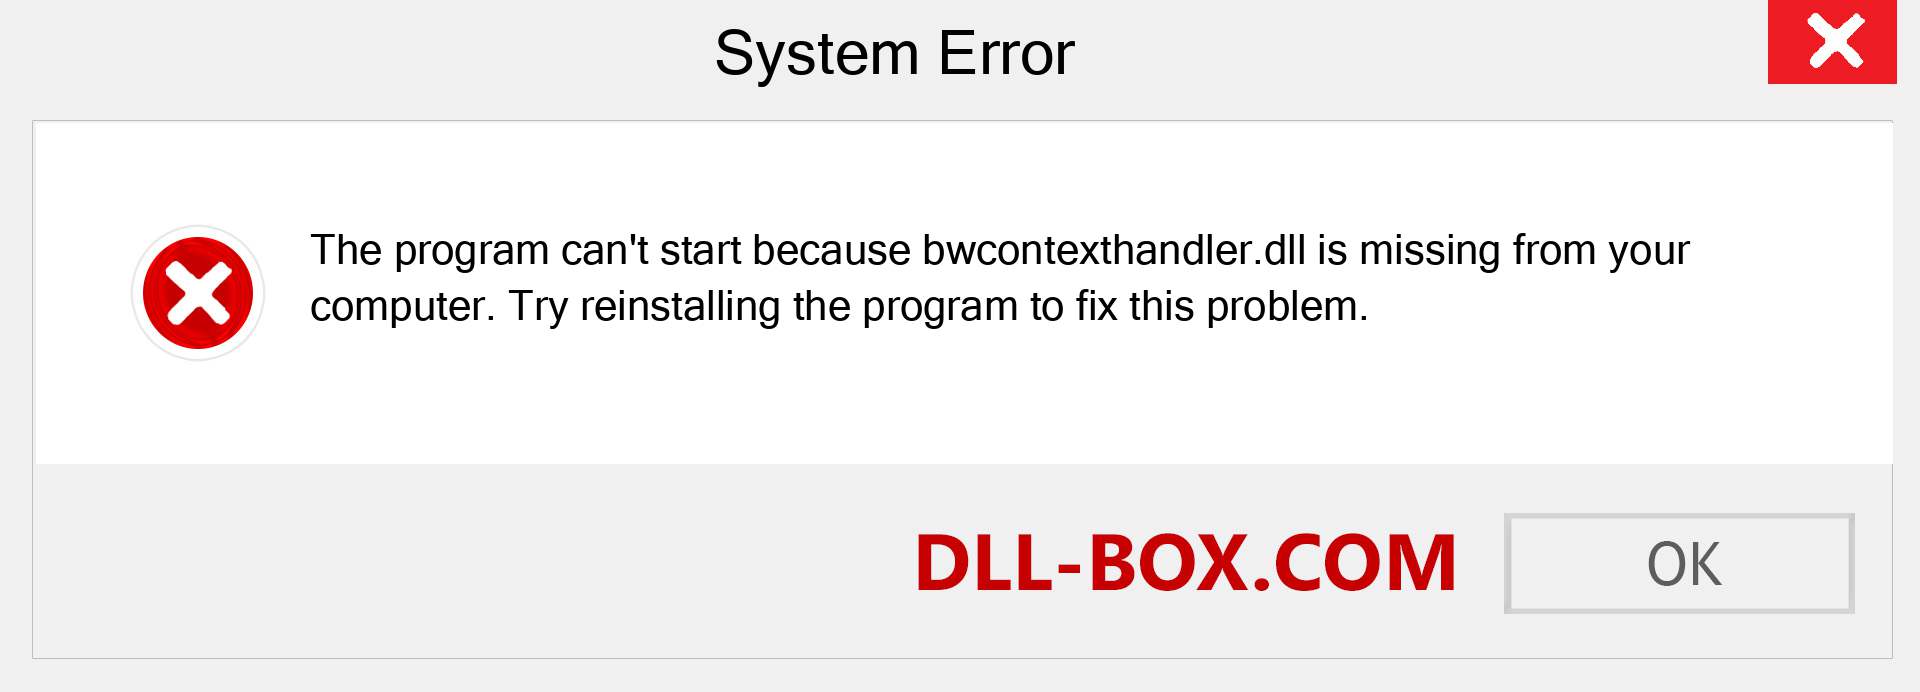  bwcontexthandler.dll file is missing?. Download for Windows 7, 8, 10 - Fix  bwcontexthandler dll Missing Error on Windows, photos, images